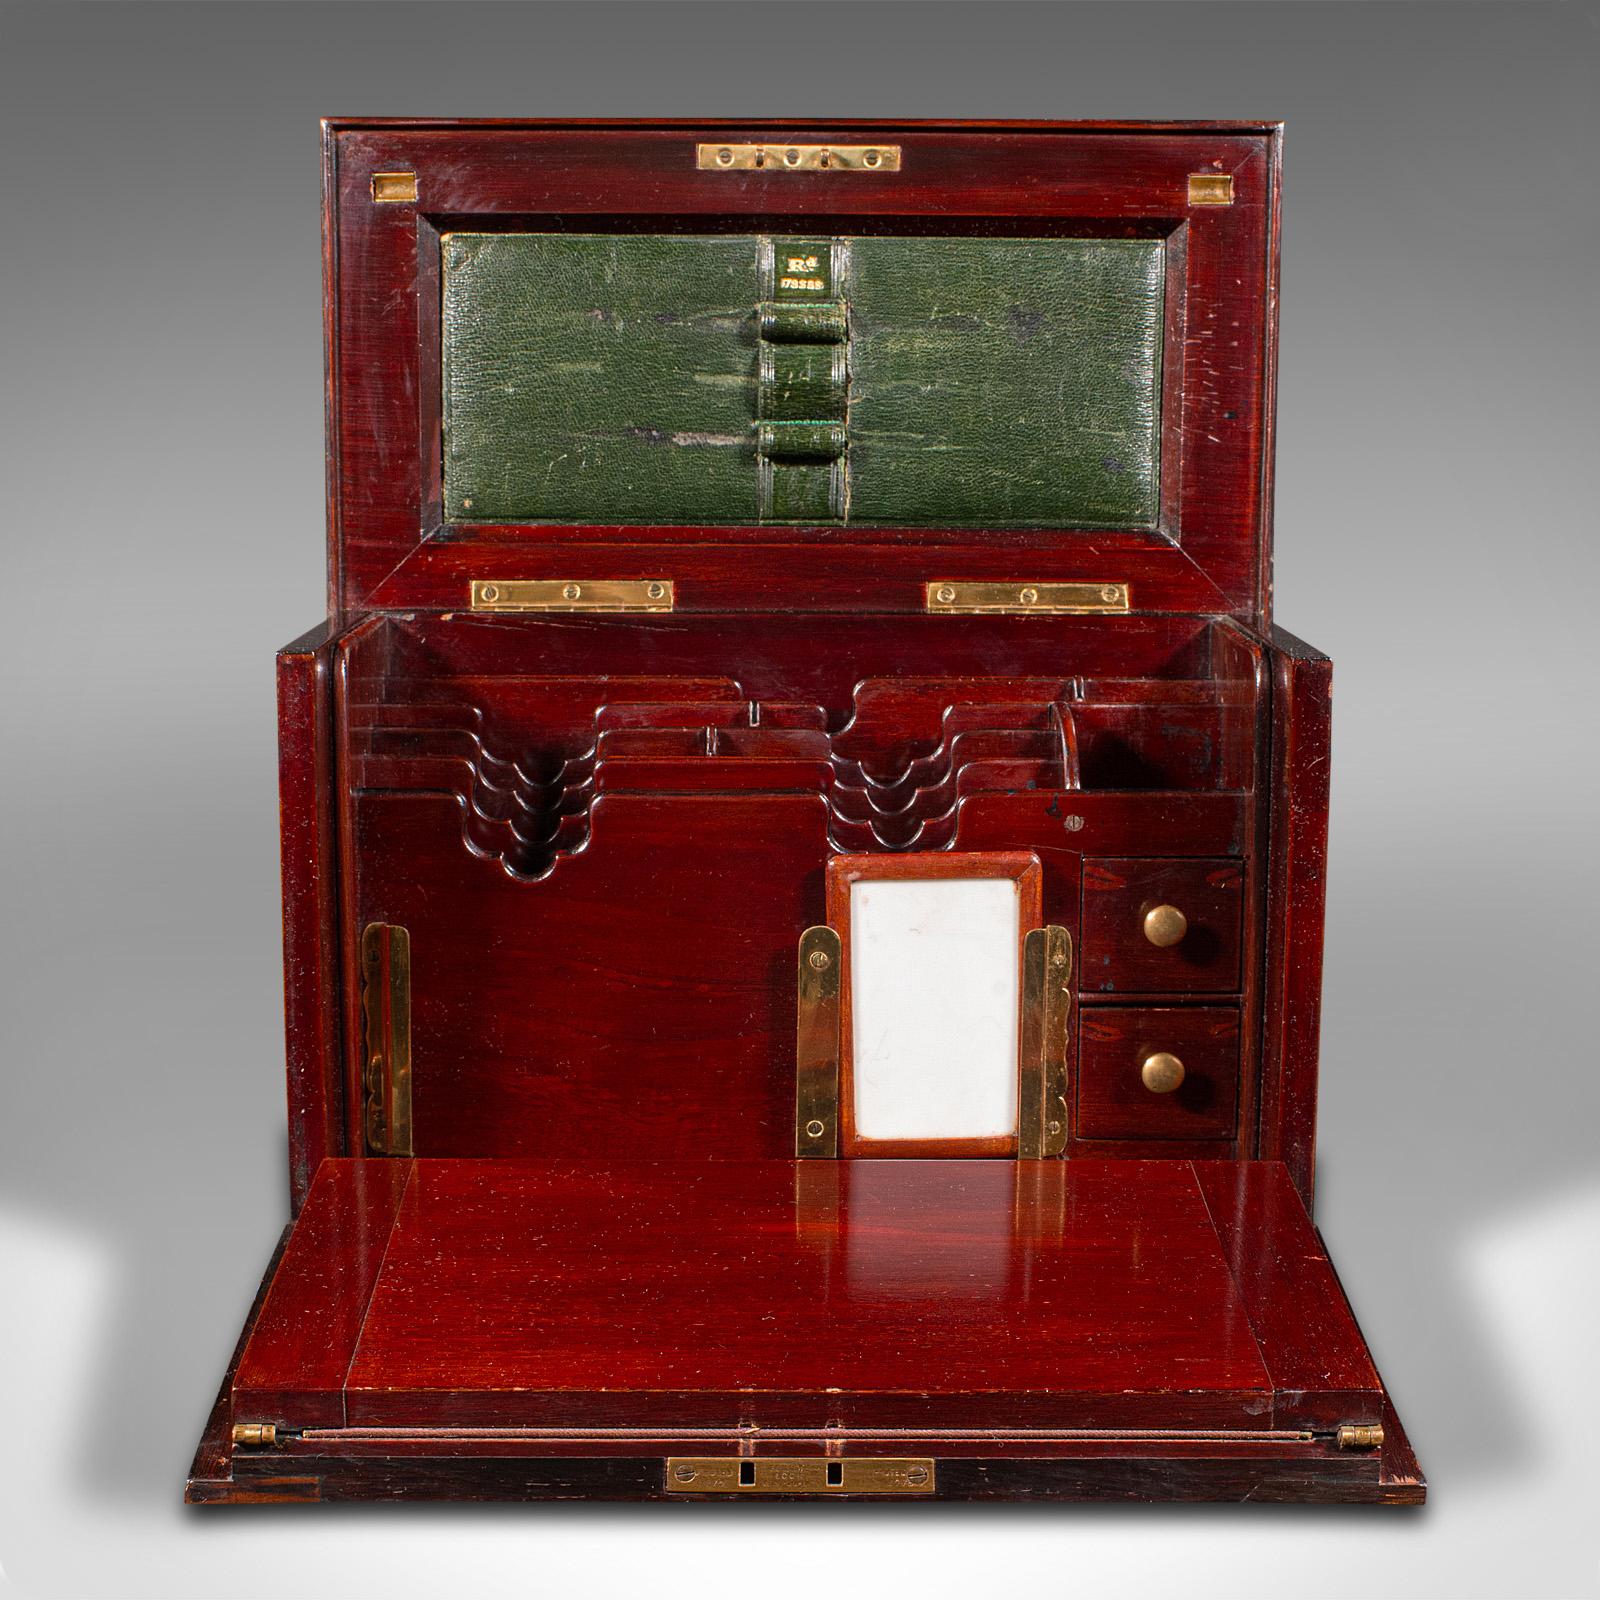 British Antique Travelling Author's Writing Box, English, Correspondence Case, Victorian For Sale